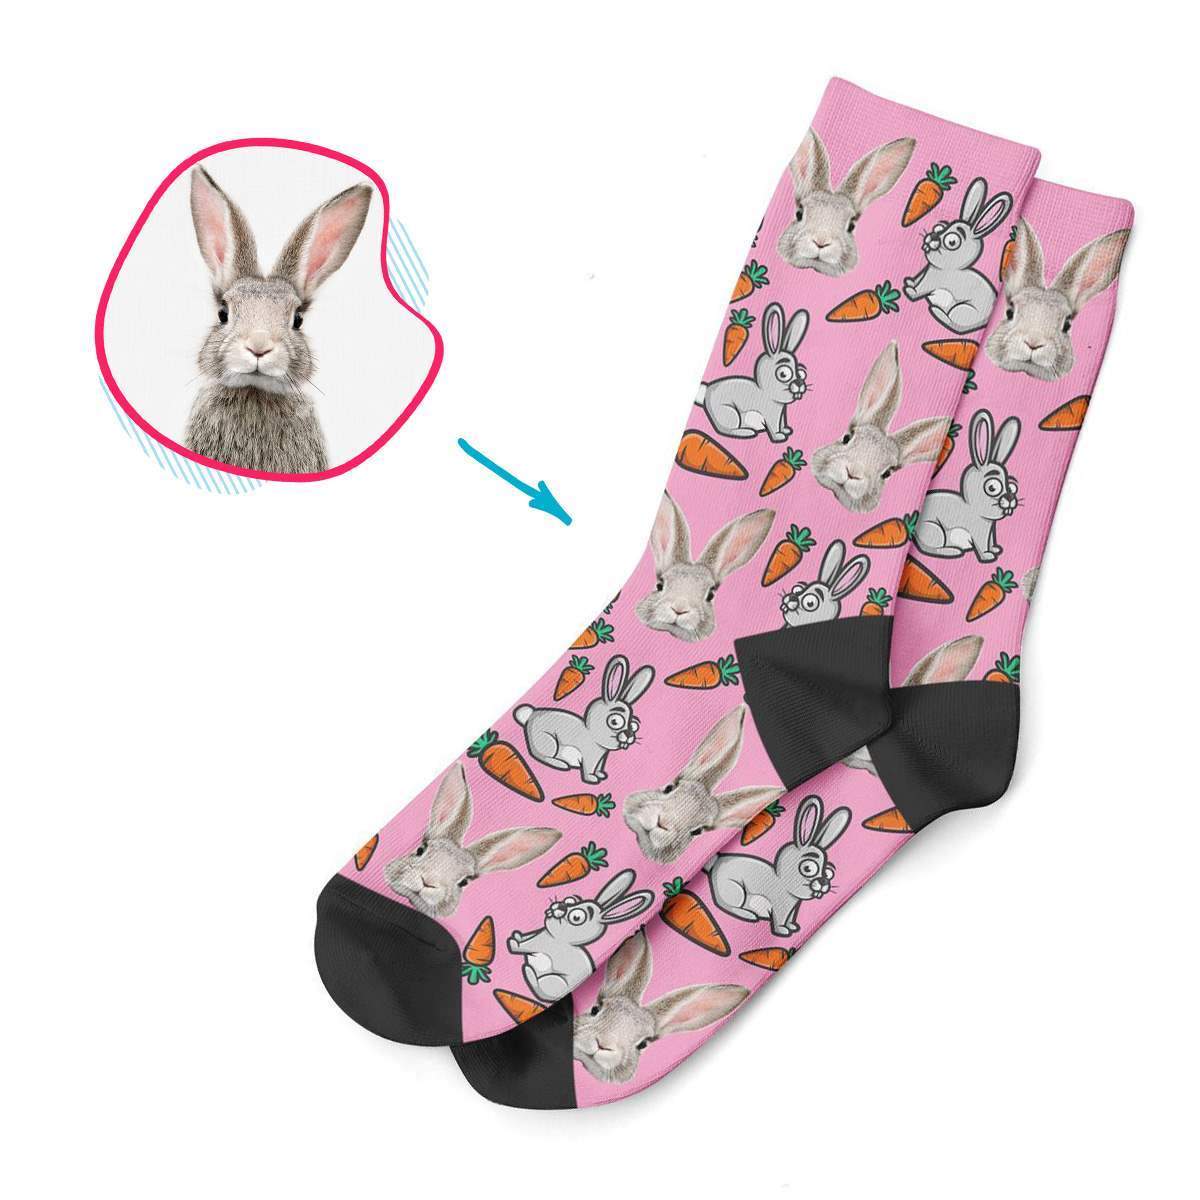 pink Bunny socks personalized with photo of face printed on them